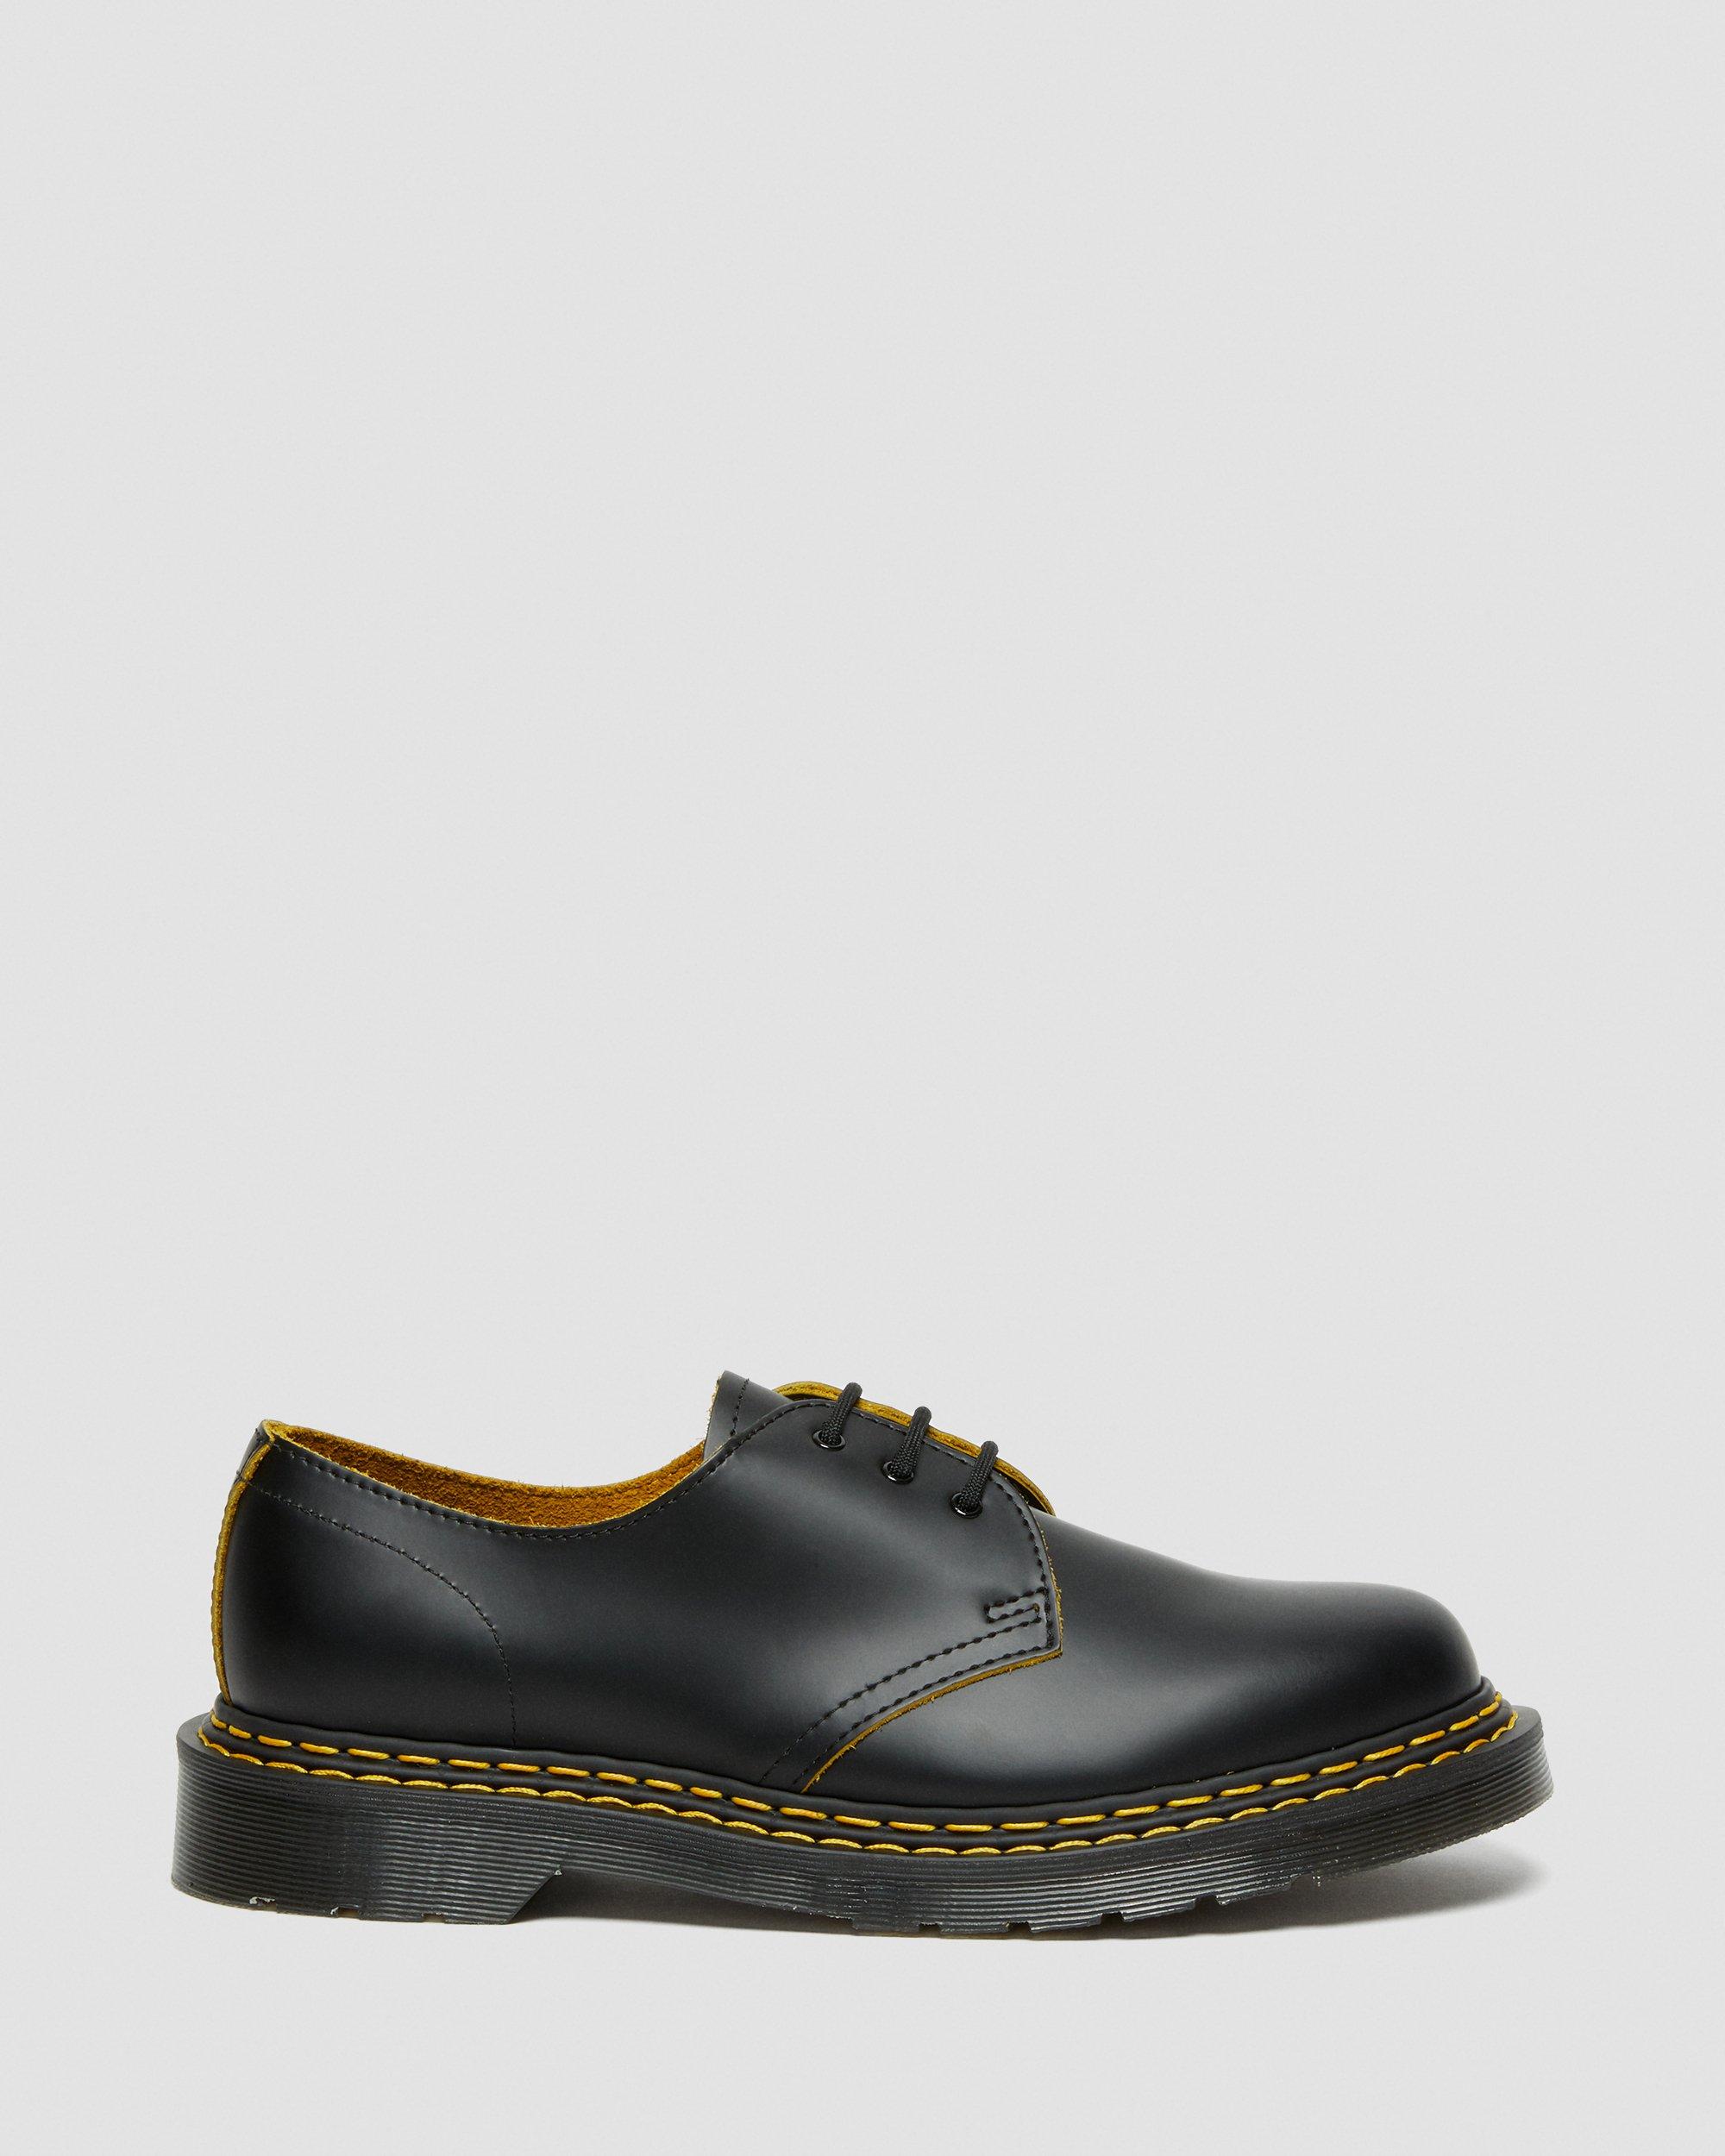 DR MARTENS 1461 Double Stitch Leather Oxford Shoes